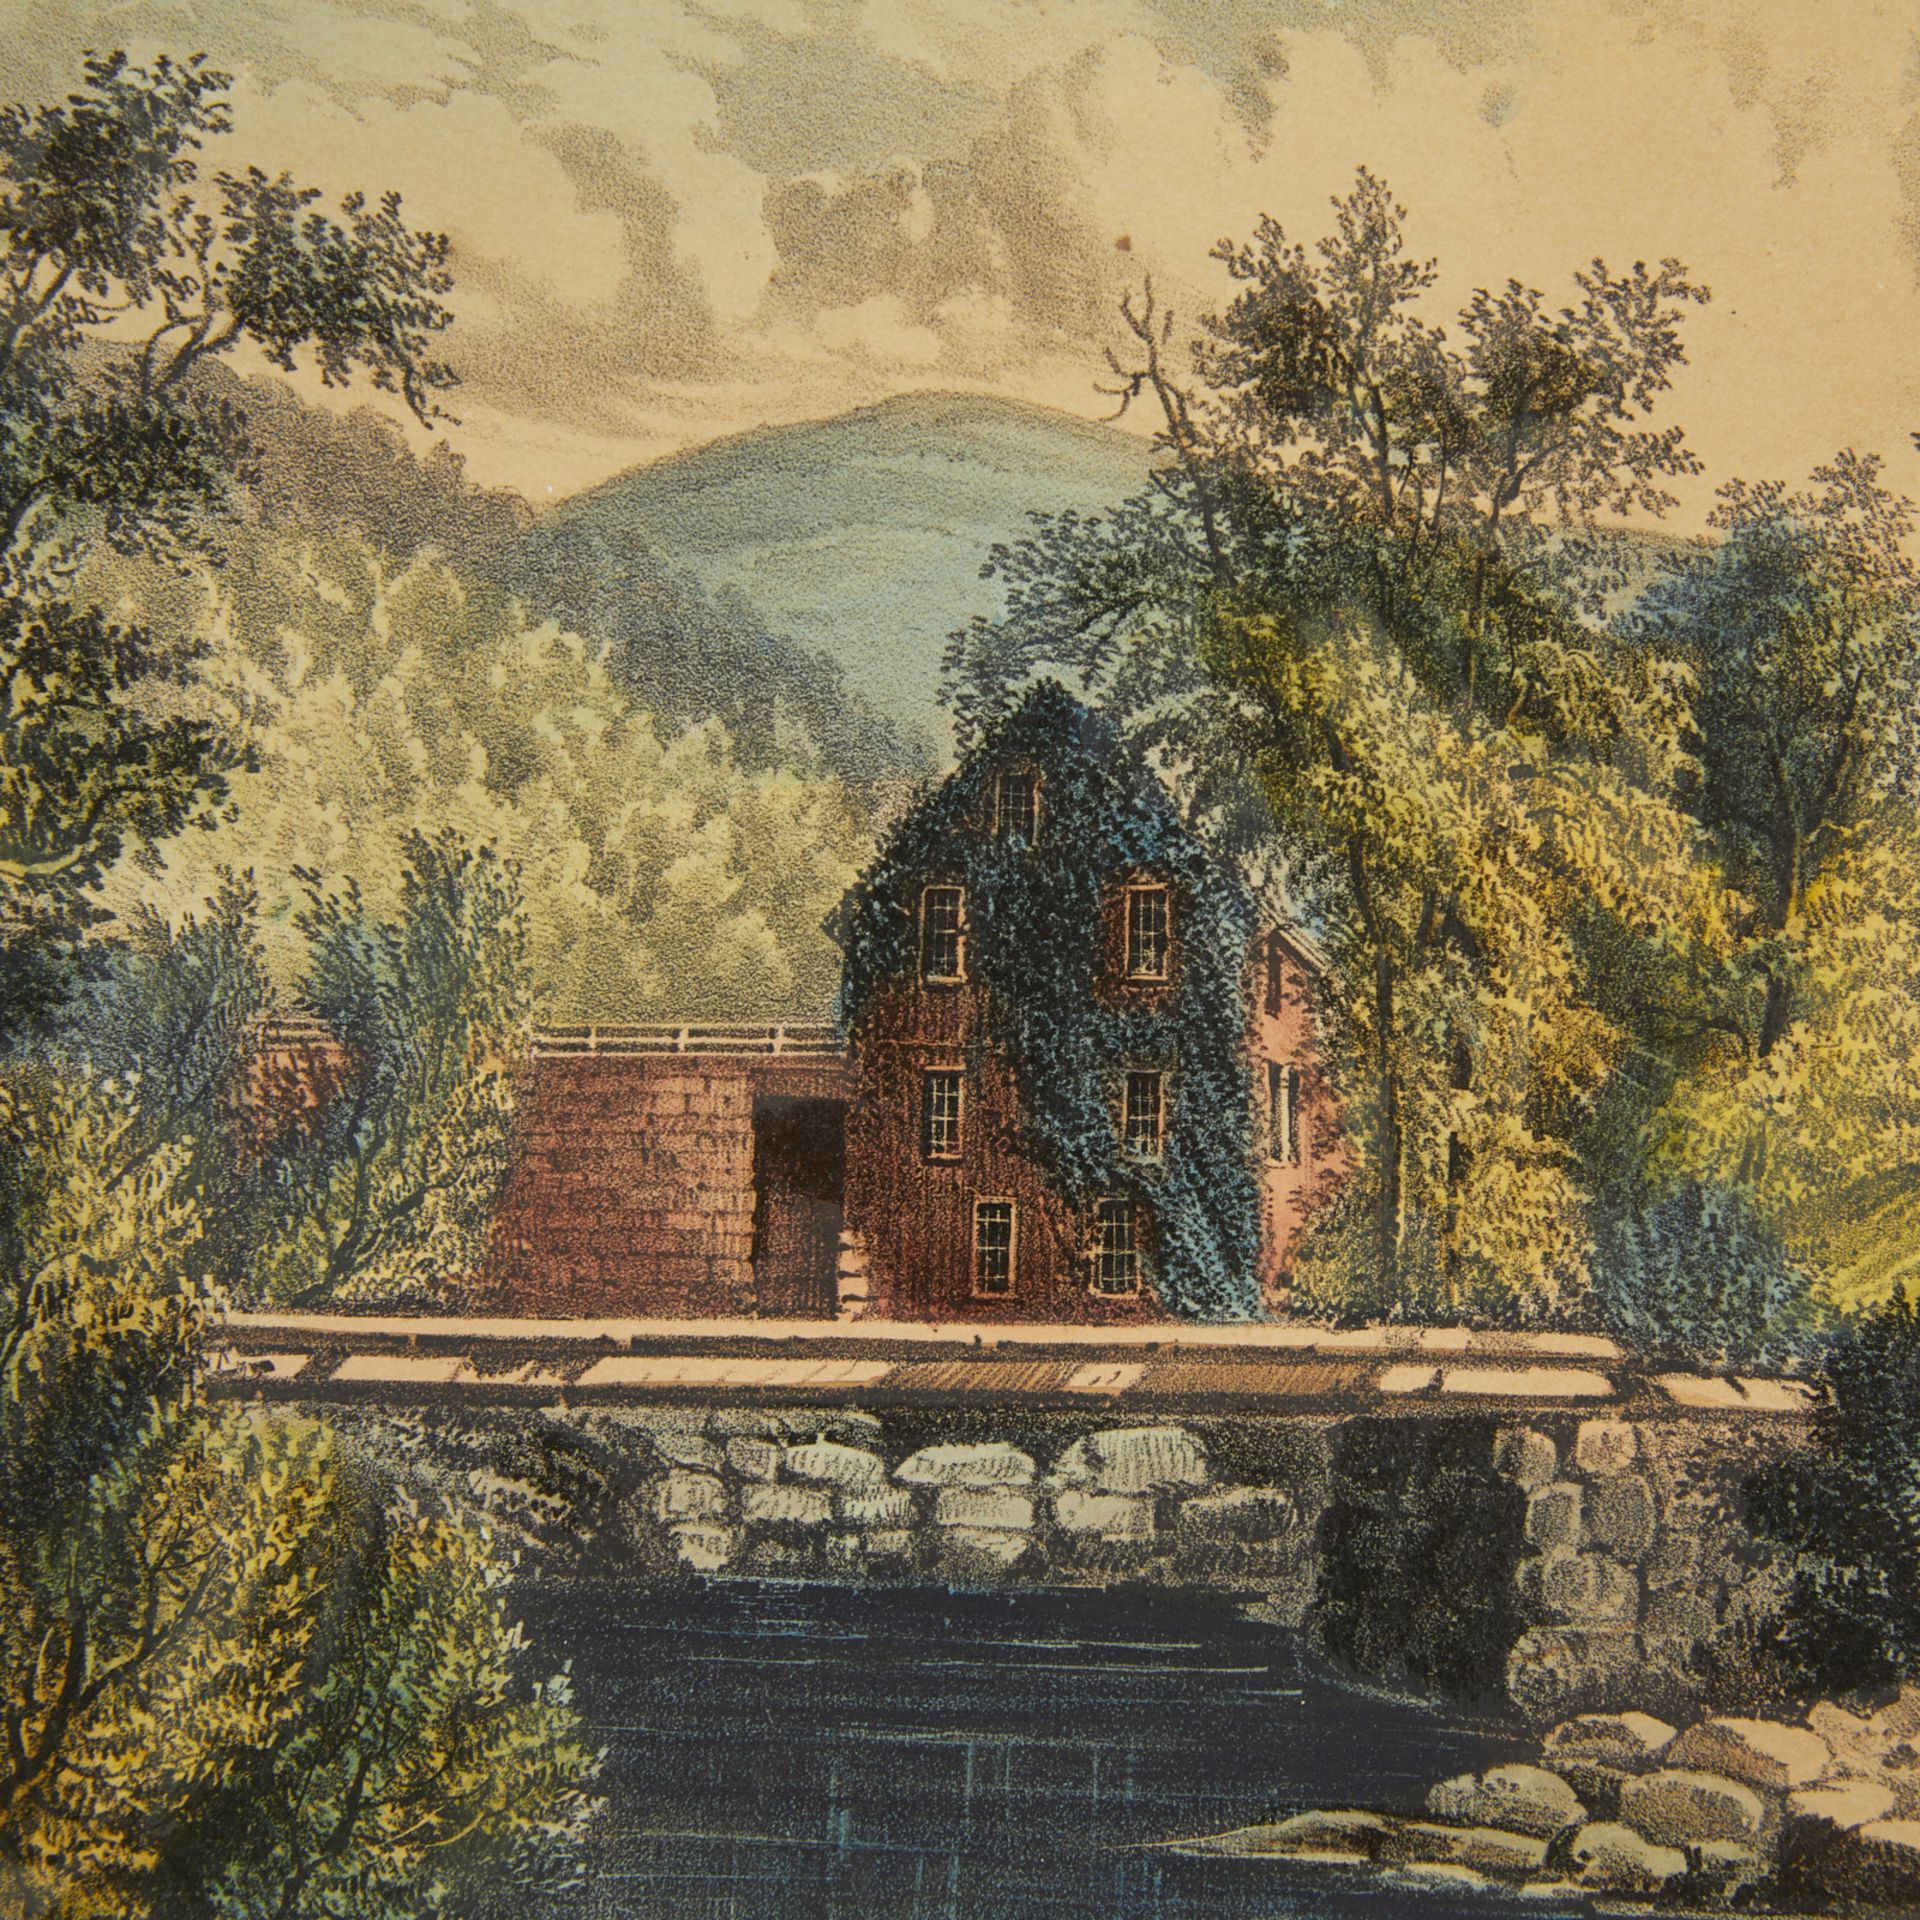 Currier & Ives "Artists Creek: North Conway" Print - Image 6 of 8